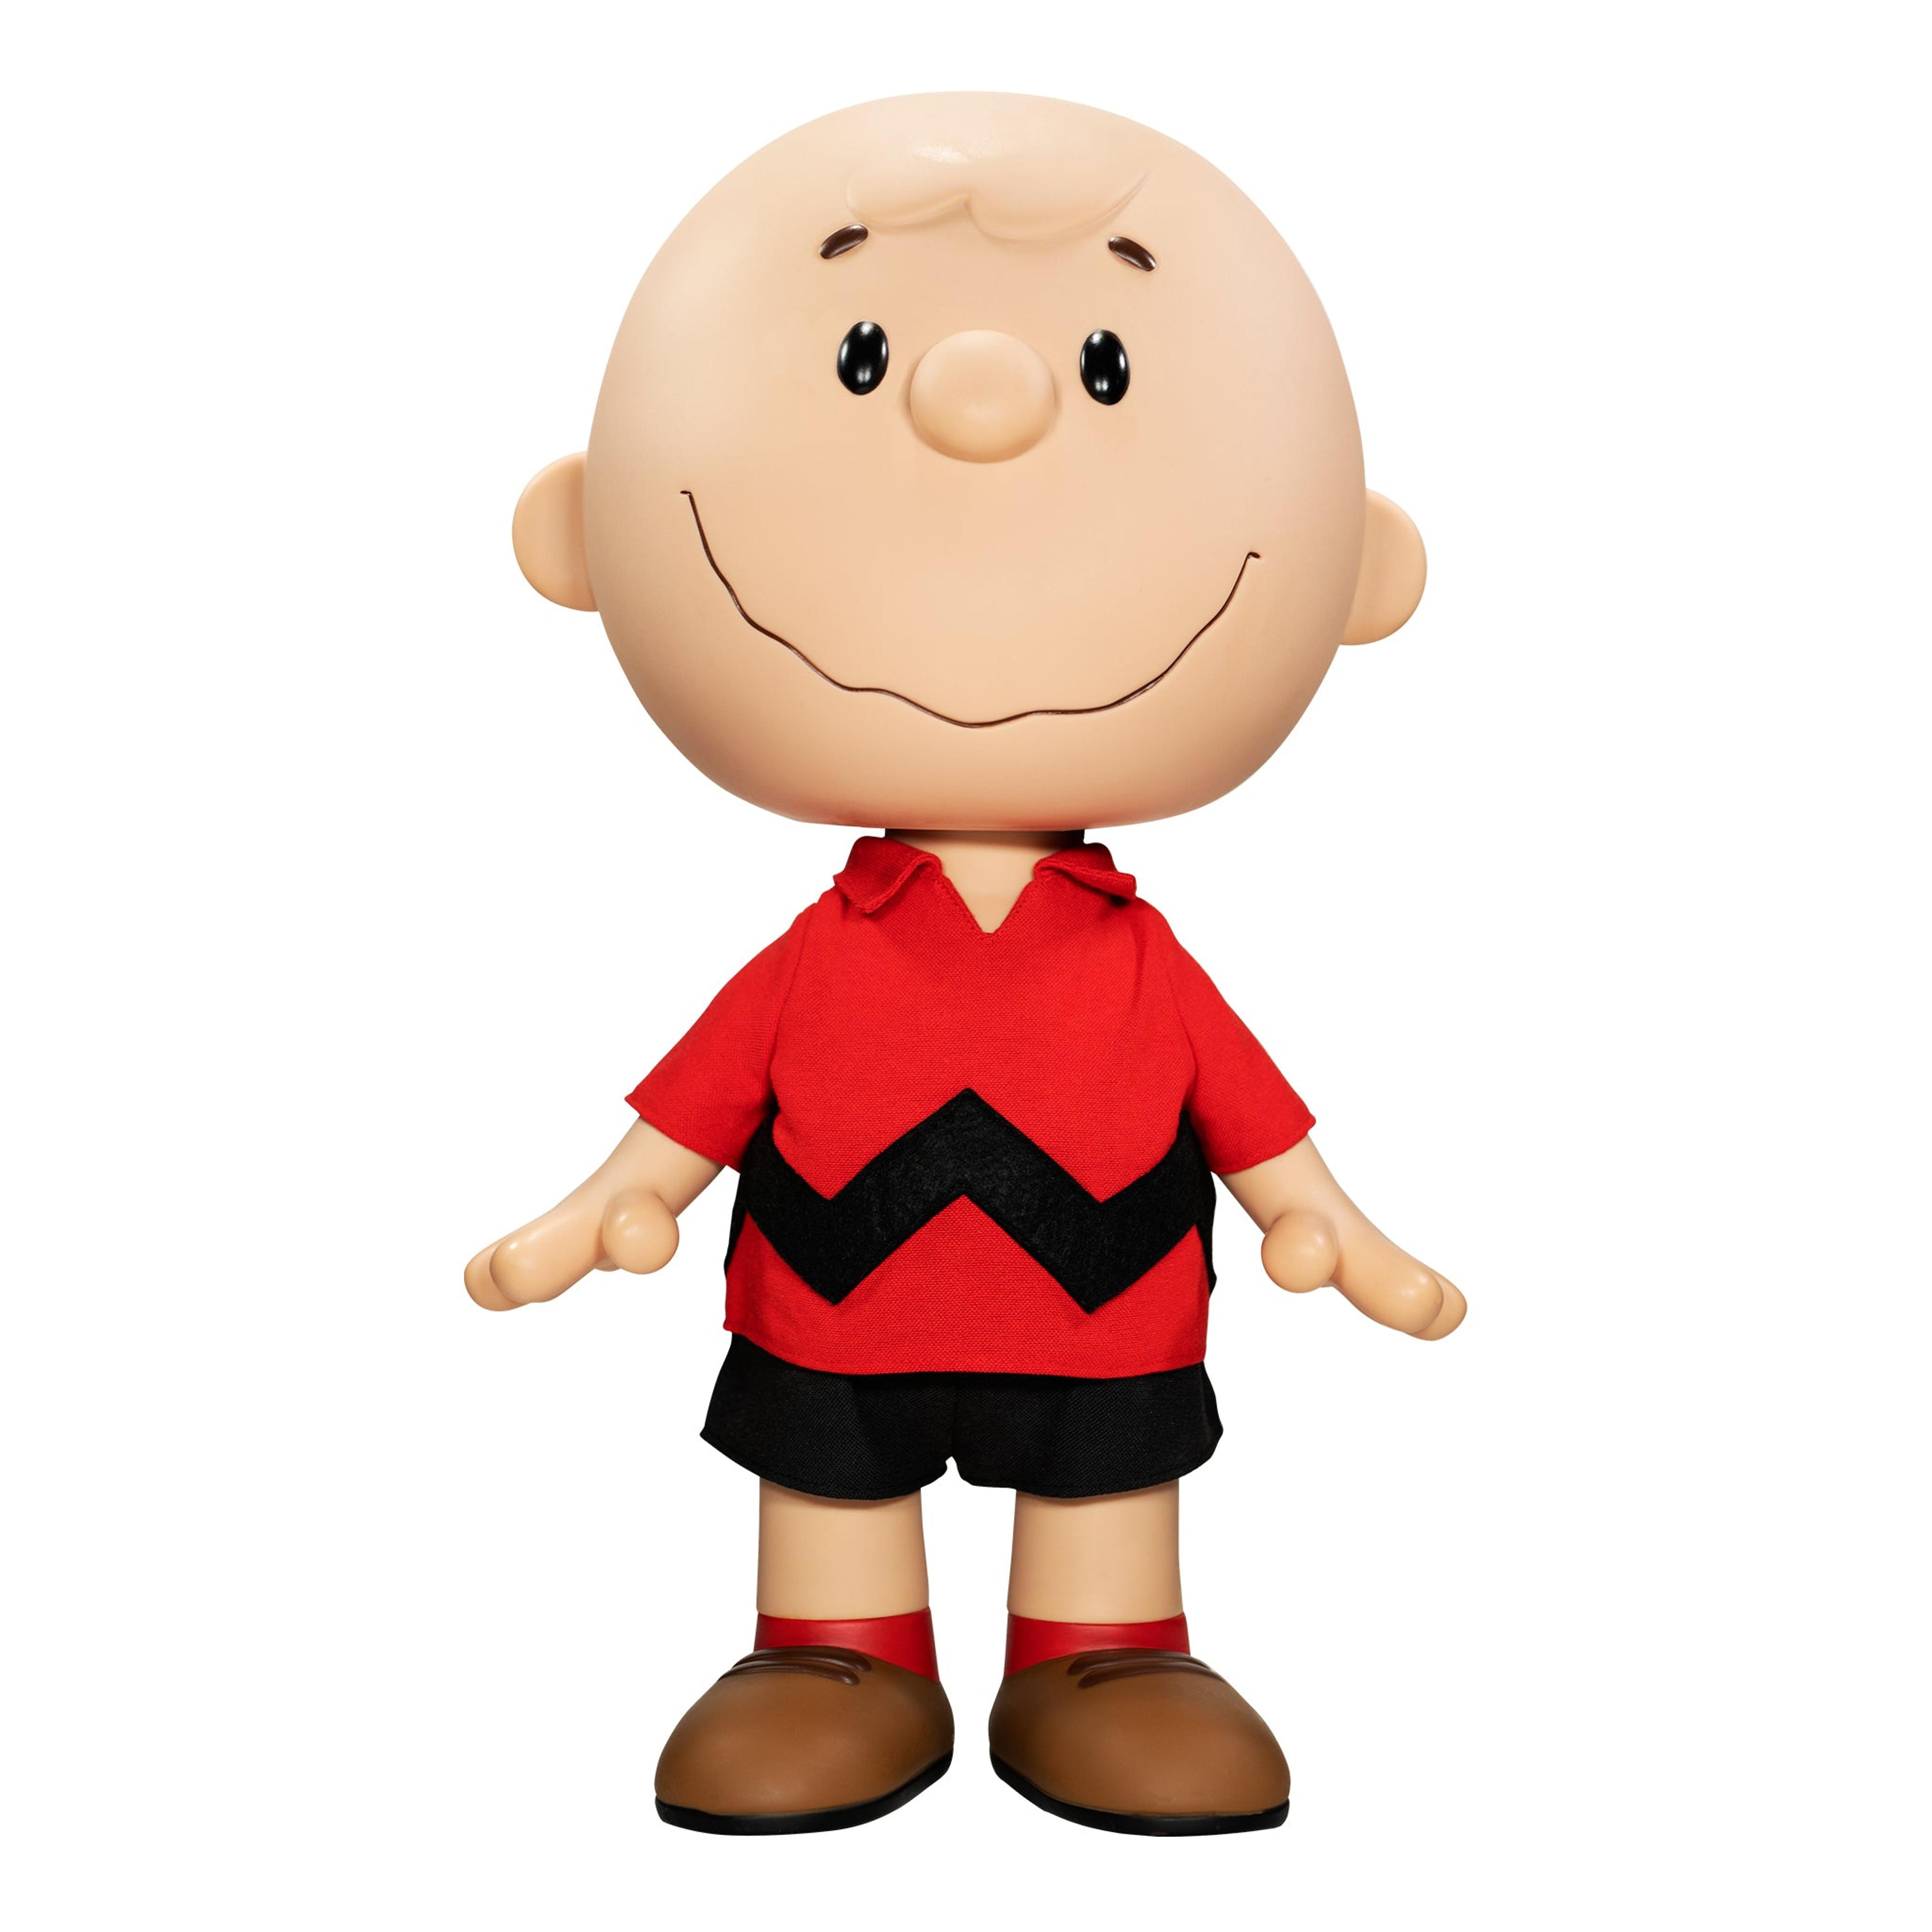 Alternate View 1 of Peanuts Supersize - Charlie Brown (Red Shirt)